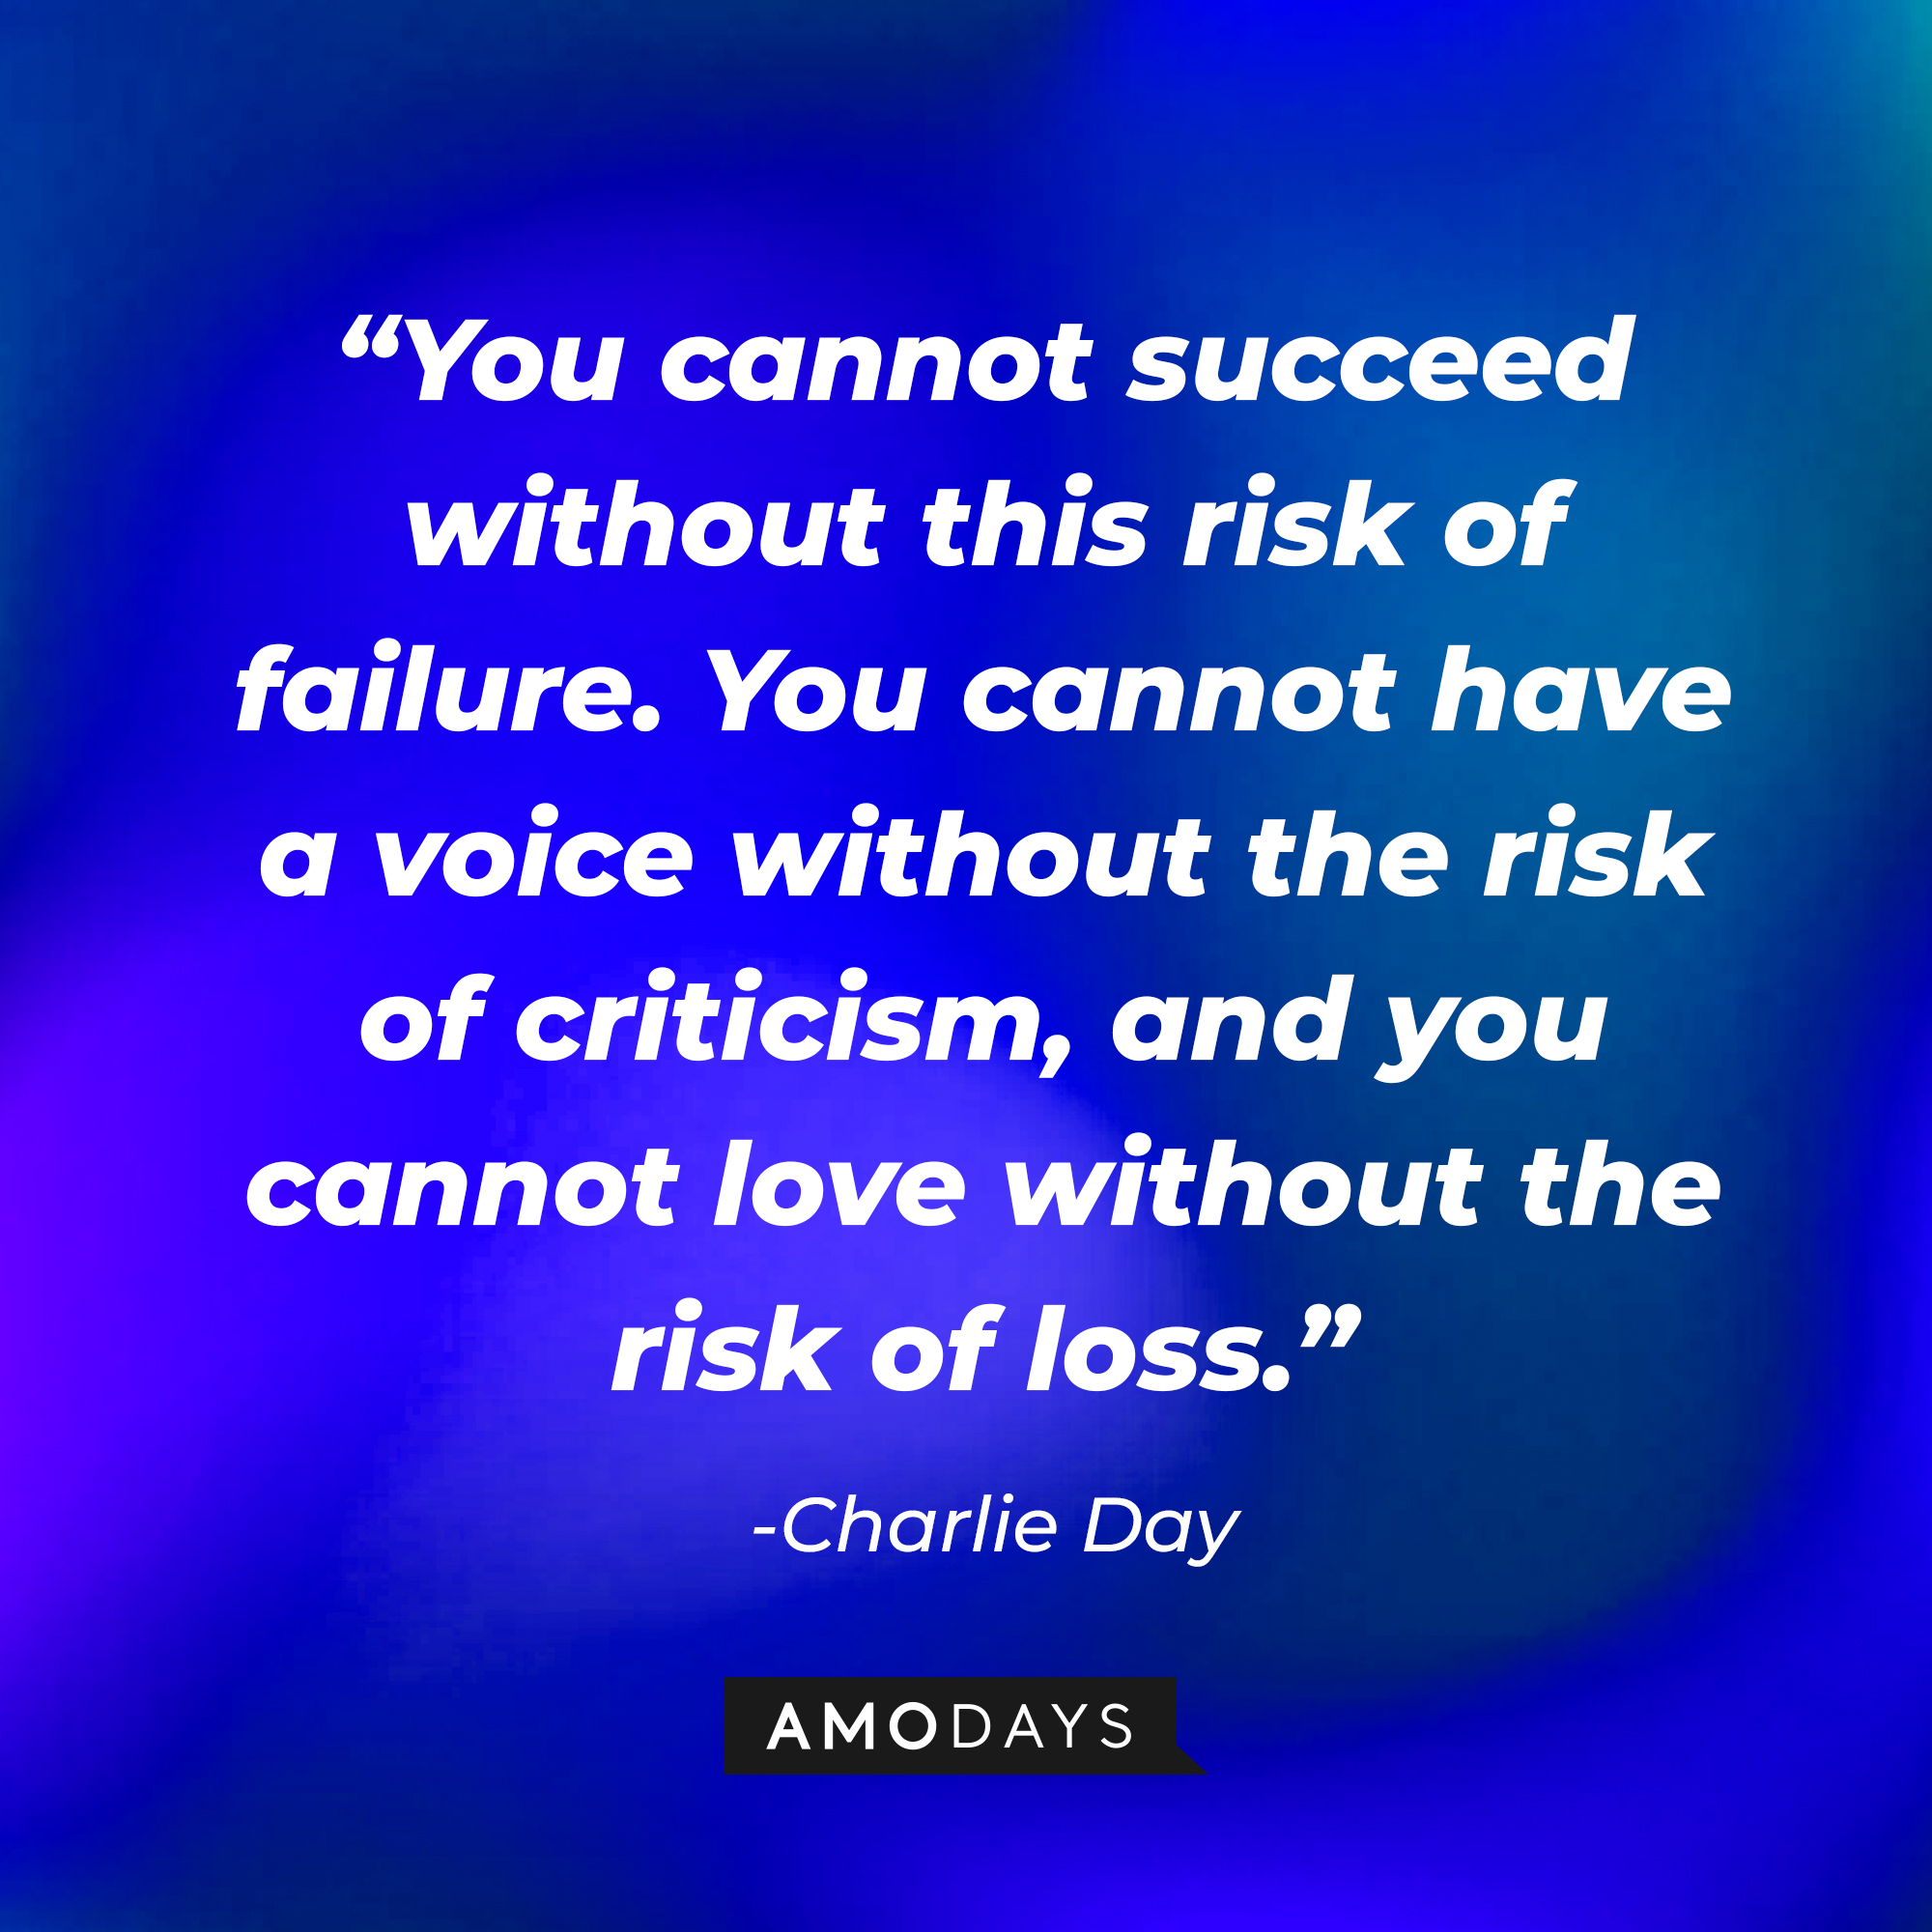 Charlie Day’s quote: “You cannot succeed without this risk of failure. You cannot have a voice without the risk of criticism, and you cannot love without the risk of loss.” | Source: AmoDays